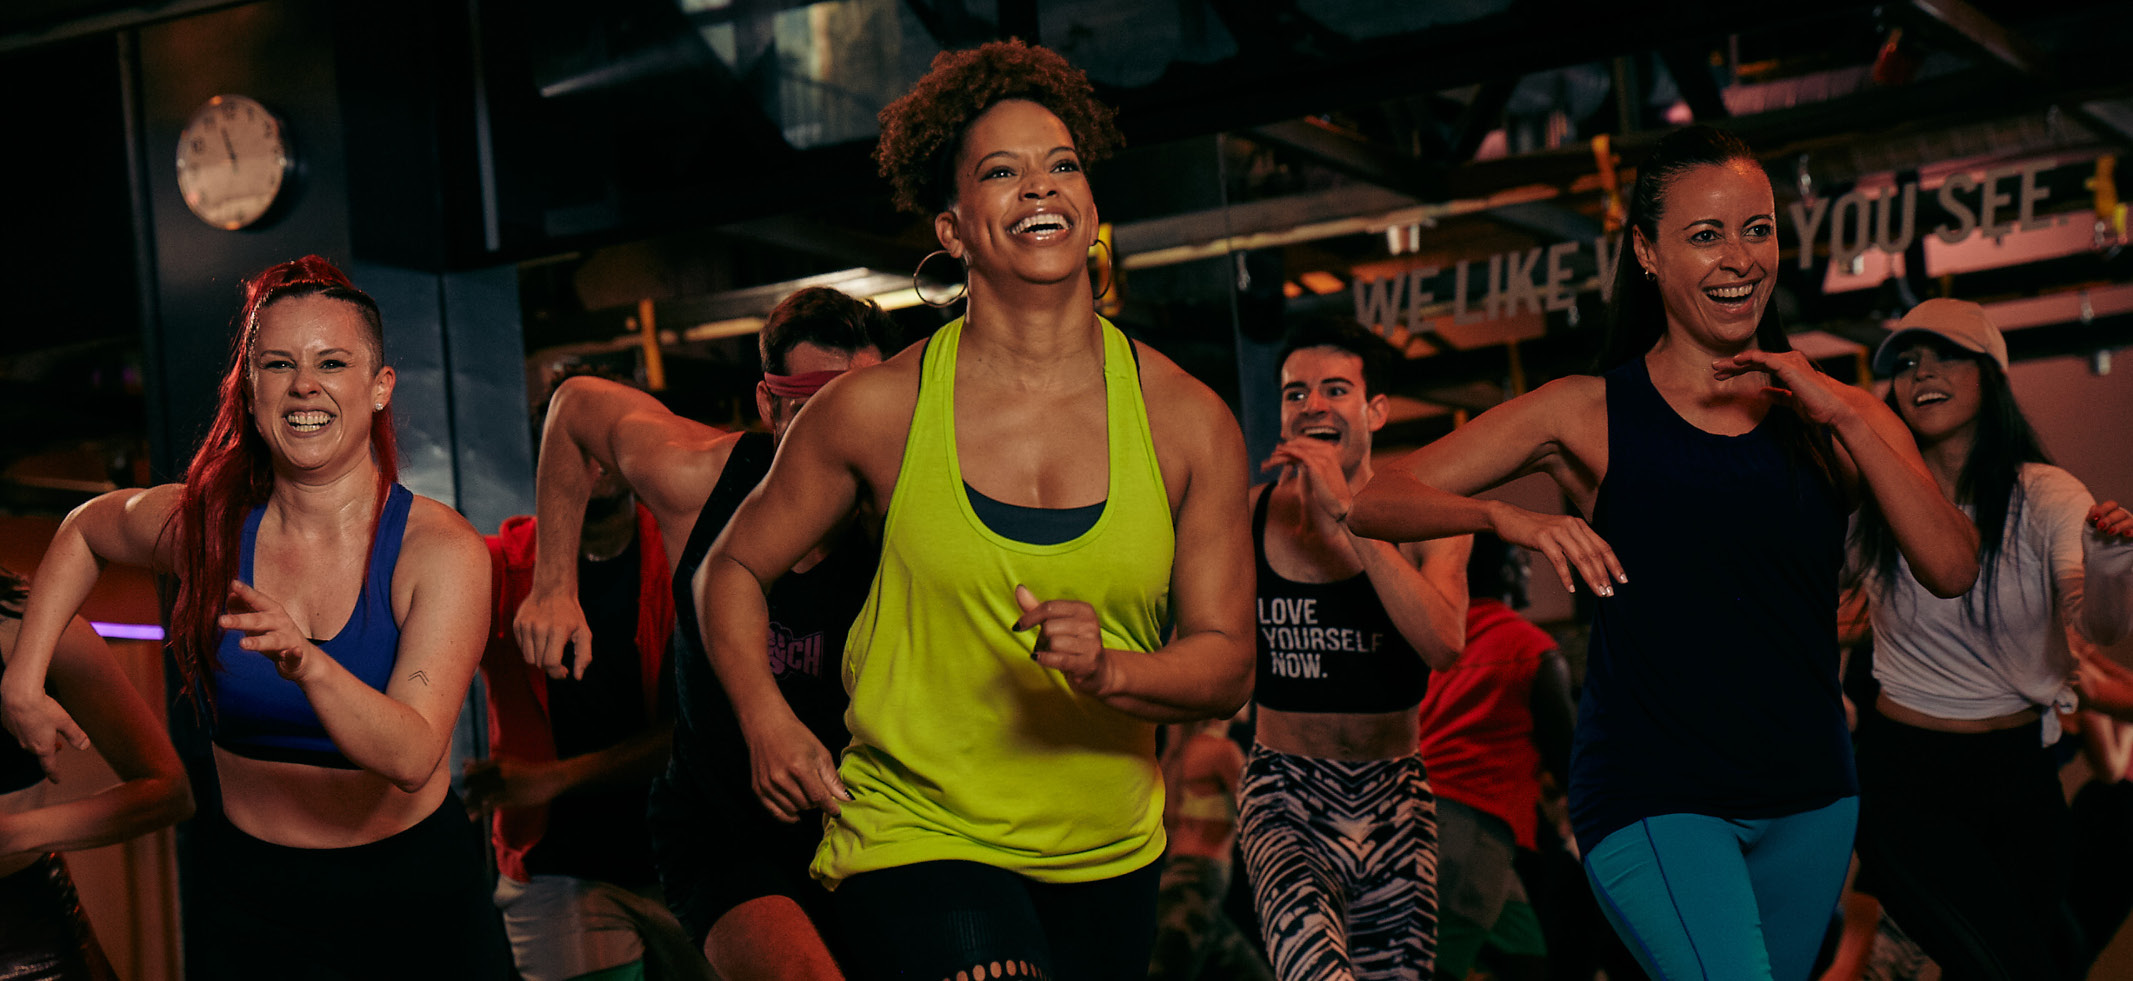 The 4 Best Types of Workout Classes for Women - Crunch